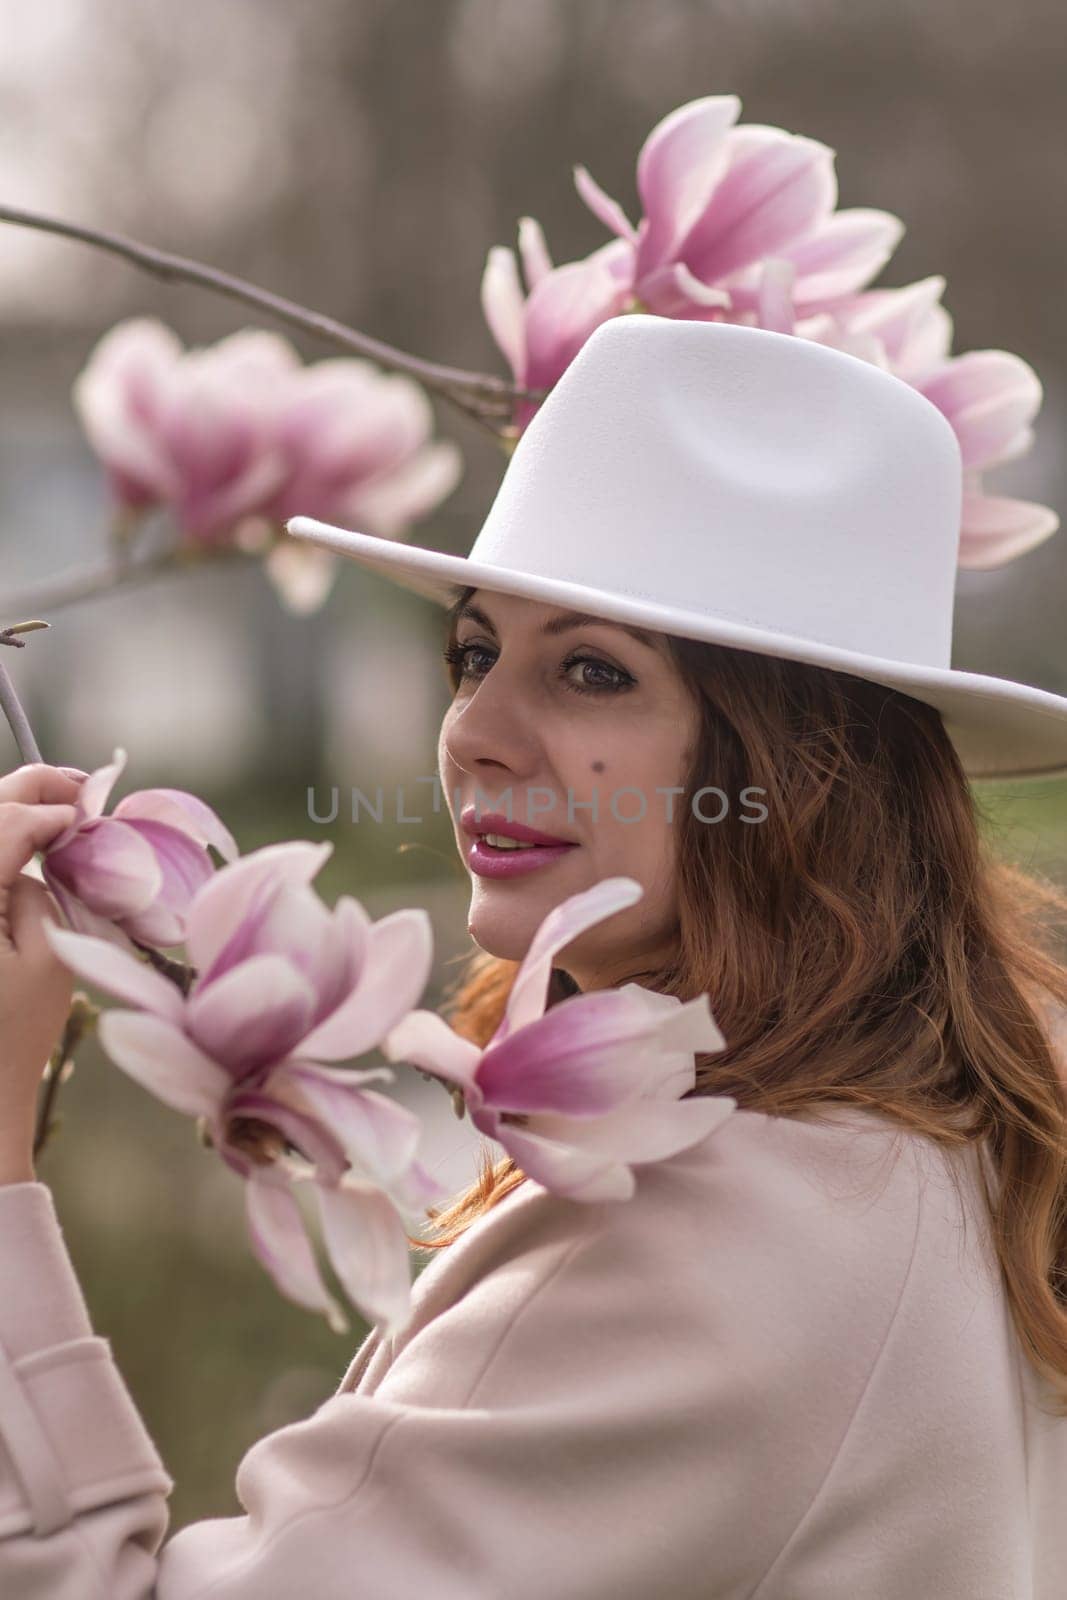 Woman magnolia flowers, surrounded by blossoming trees., hair down, white hat, wearing a light coat. Captured during spring, showcasing natural beauty and seasonal change. by Matiunina